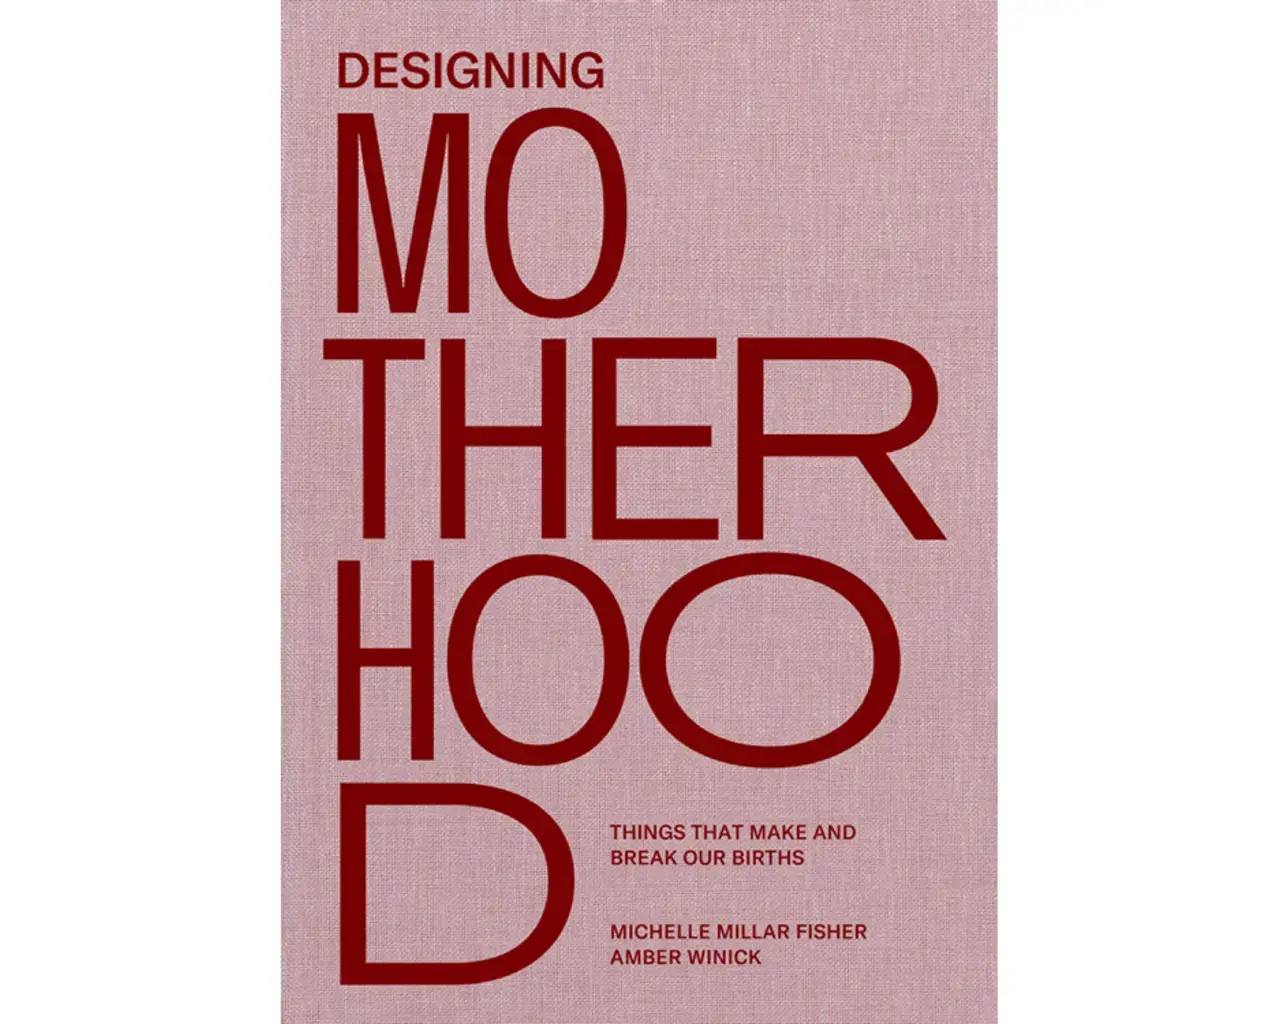 Designing Motherhood: Things That Make and Break Our Births book cover, 2021, MIT Press.